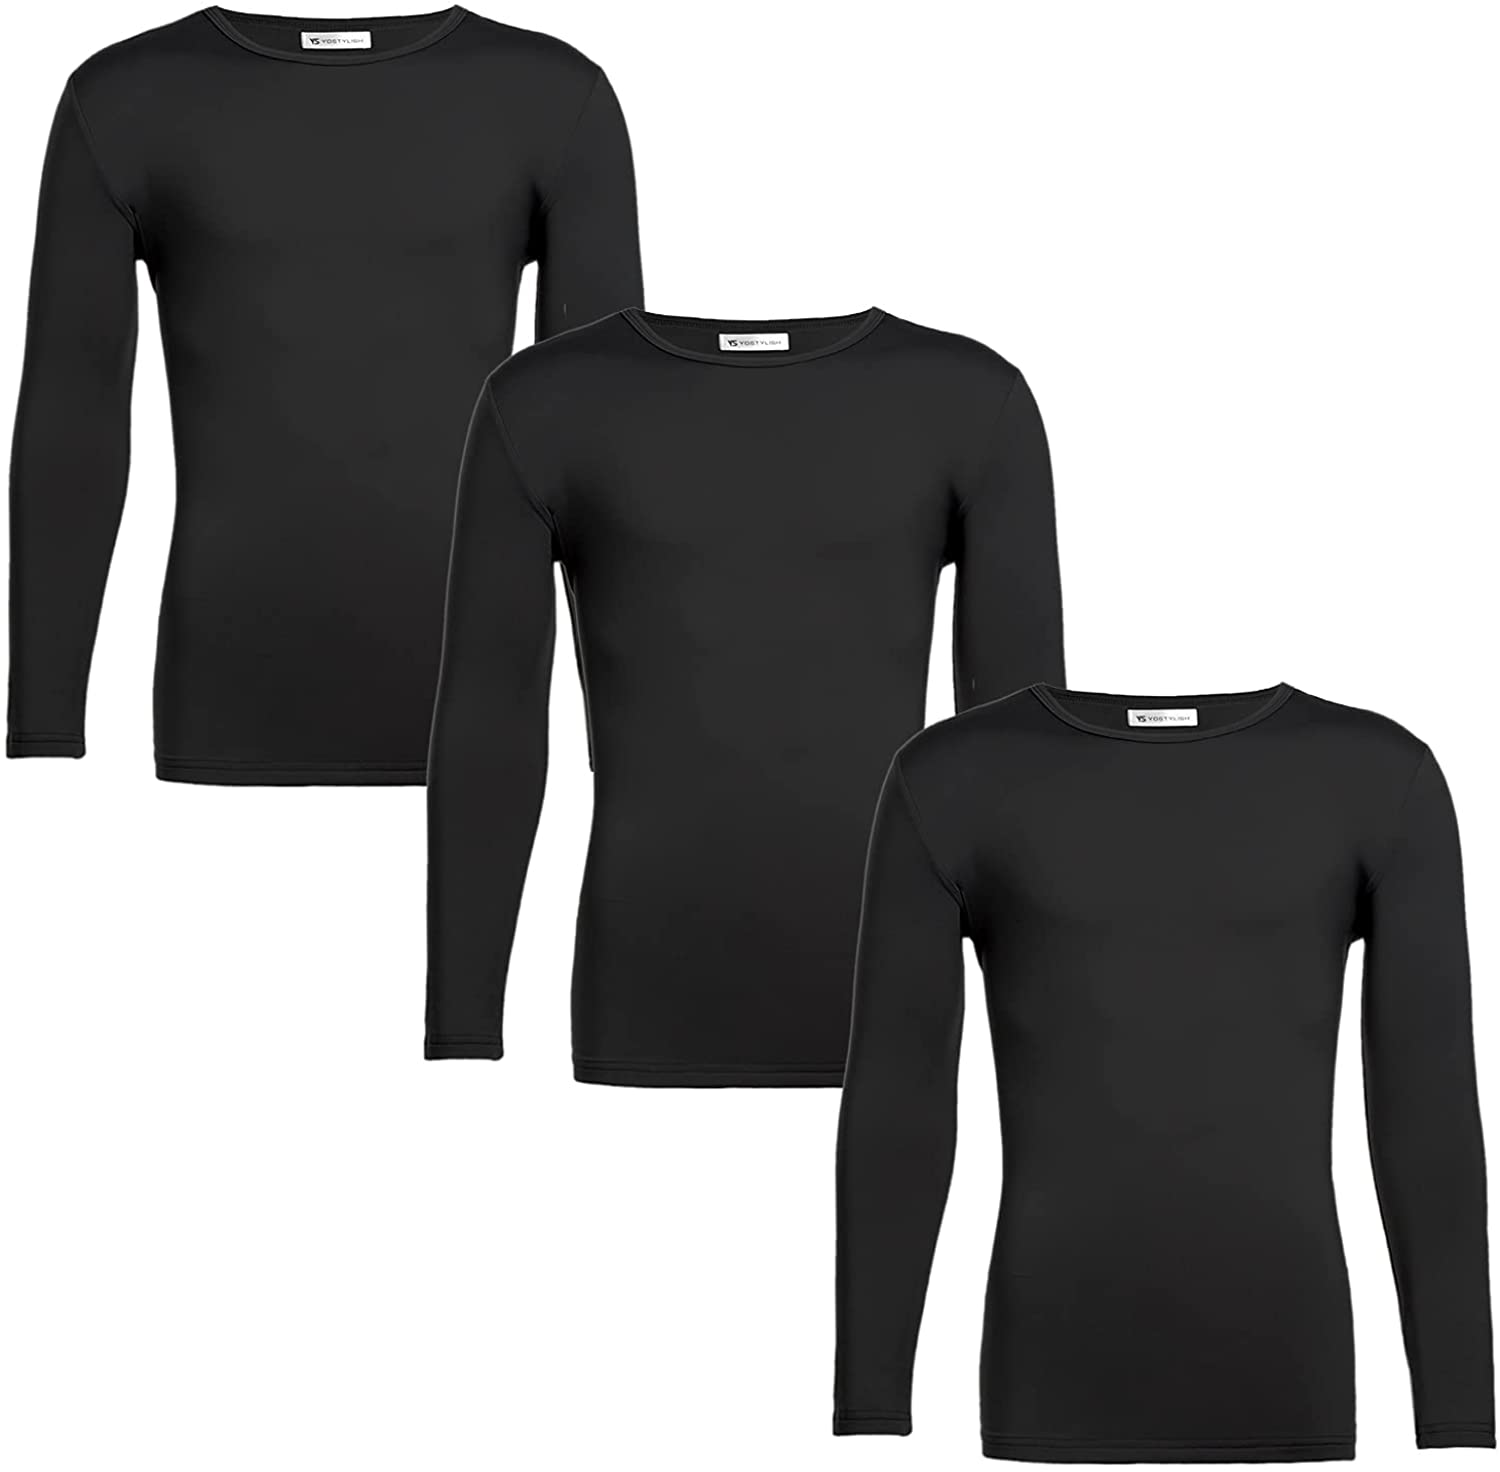 Soft Long Johns Set with Fleece Lined Warm Base Layer Top & Bottom Yostylish Thermal Underwear for Men 